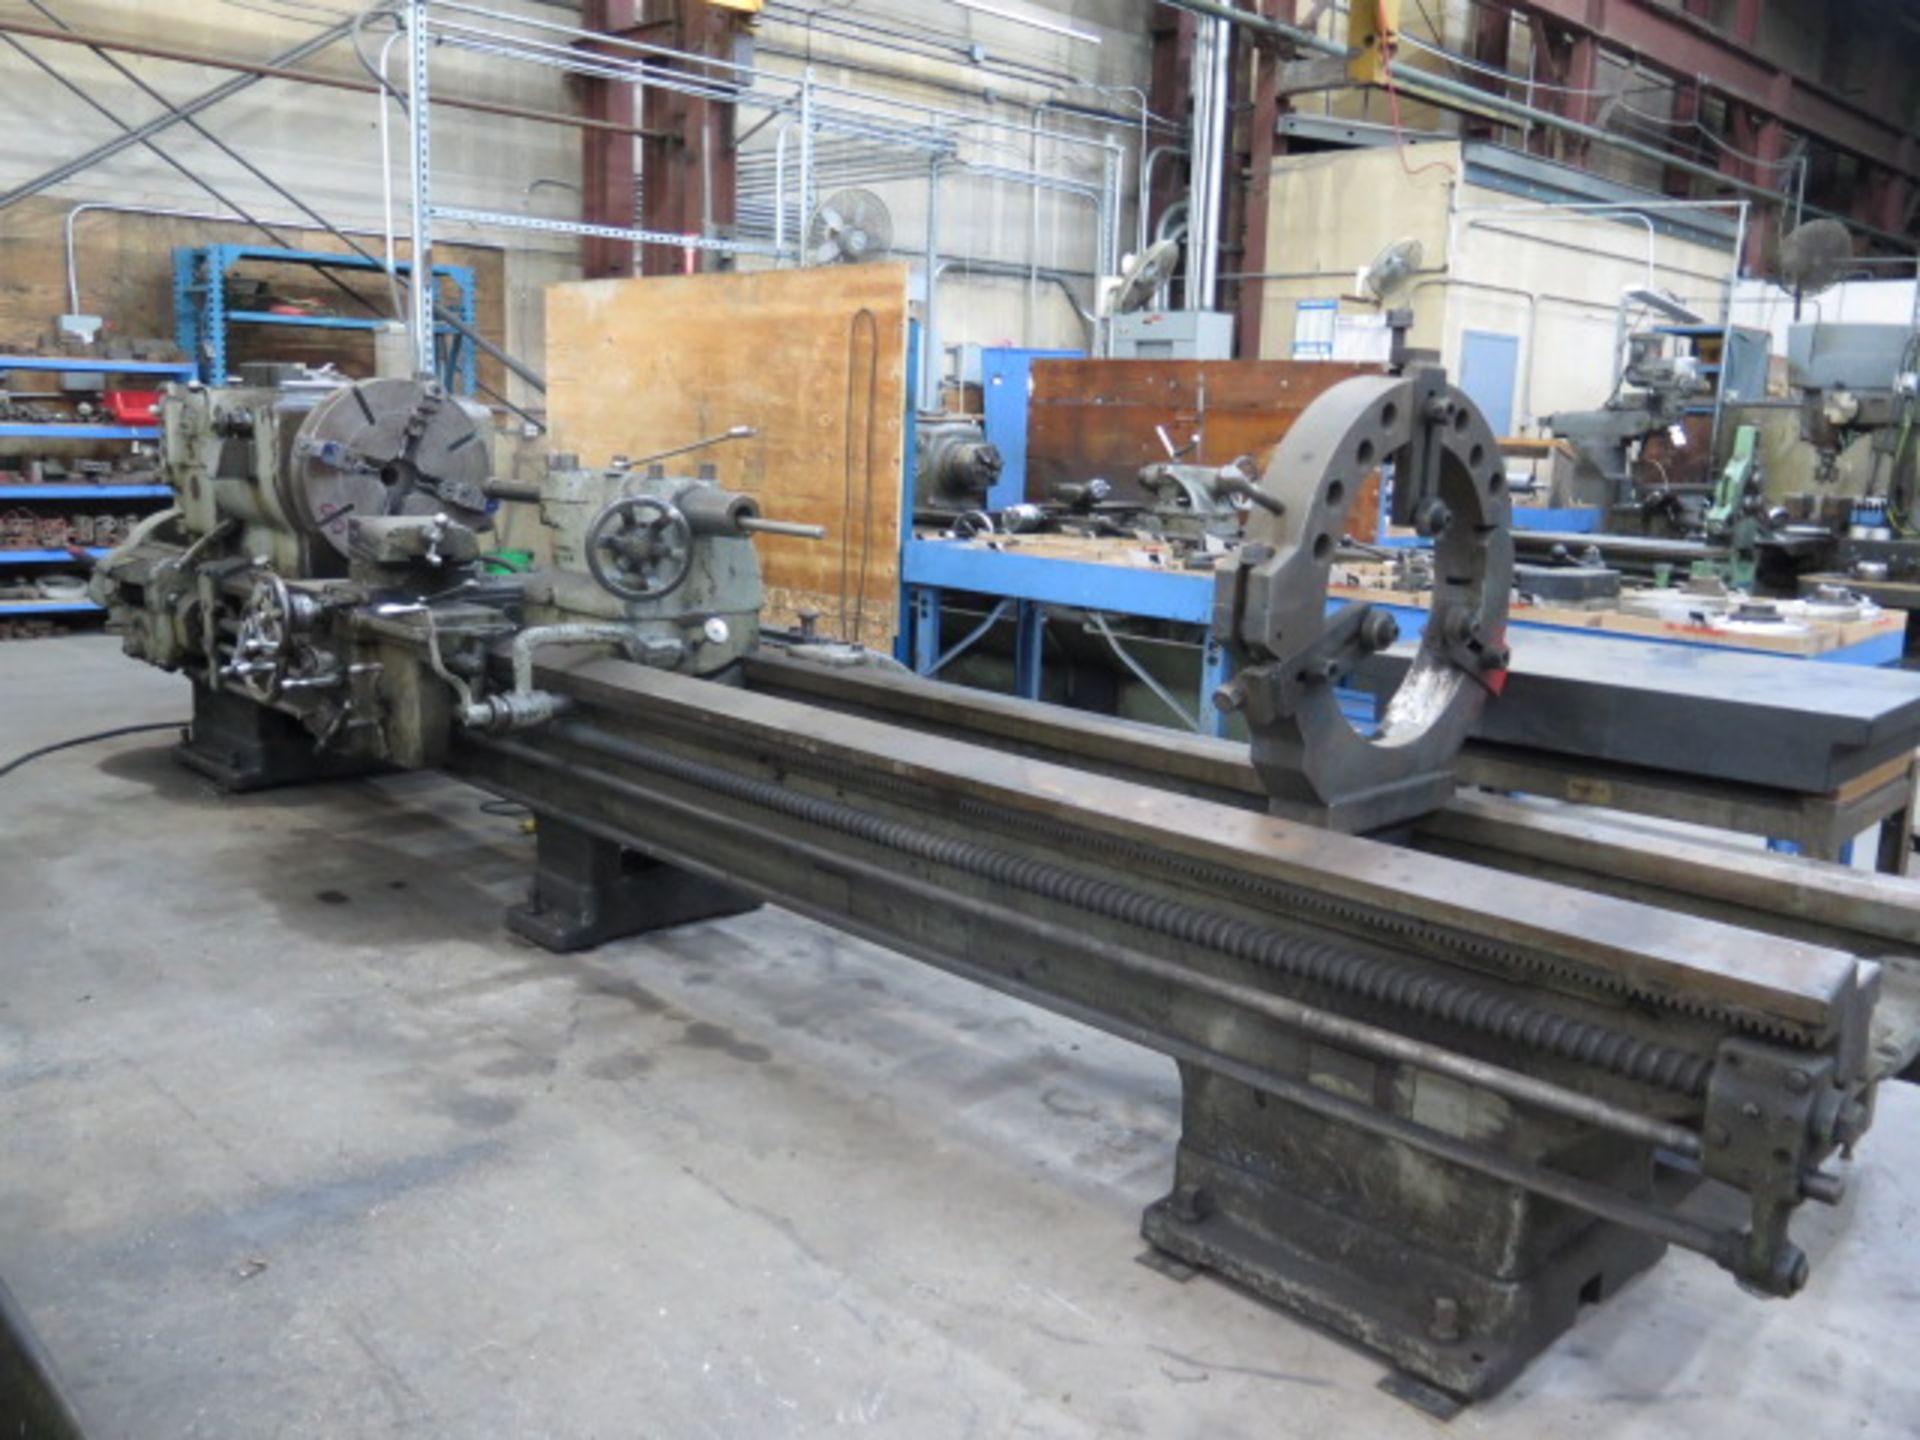 LeBlond 31” x 128” Geared Head Lathe w/ 6.5-400 RPM, Taper Attachment, Inch Threading, SOLD AS IS - Image 2 of 16